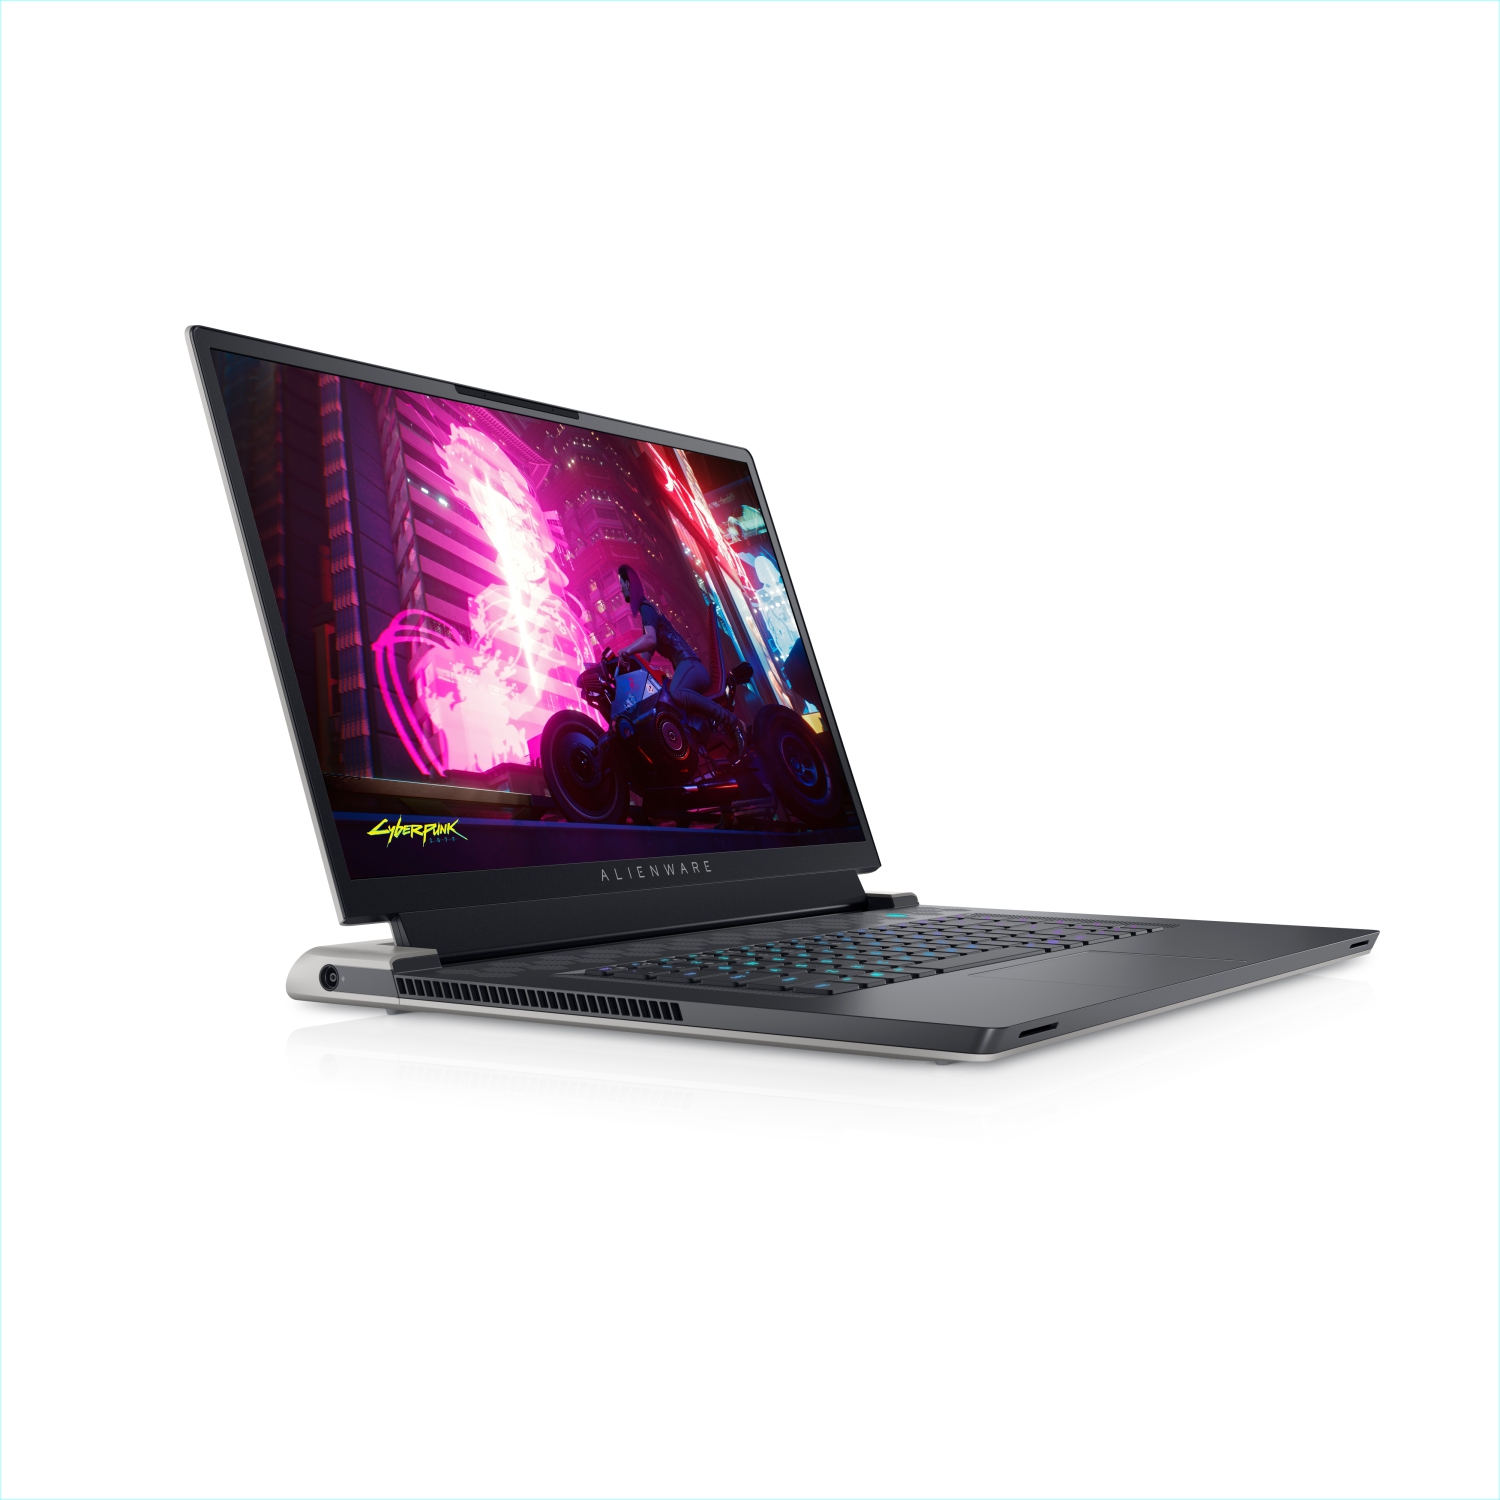 Refurbished (Excellent) - Dell Alienware X17 R1 Gaming Laptop (2021), 17.3" 4K, Core i7, 1TB SSD + 512GB SSD, 64GB RAM, RTX 3080, 4.6 GHz, 11th Gen CPU Certified